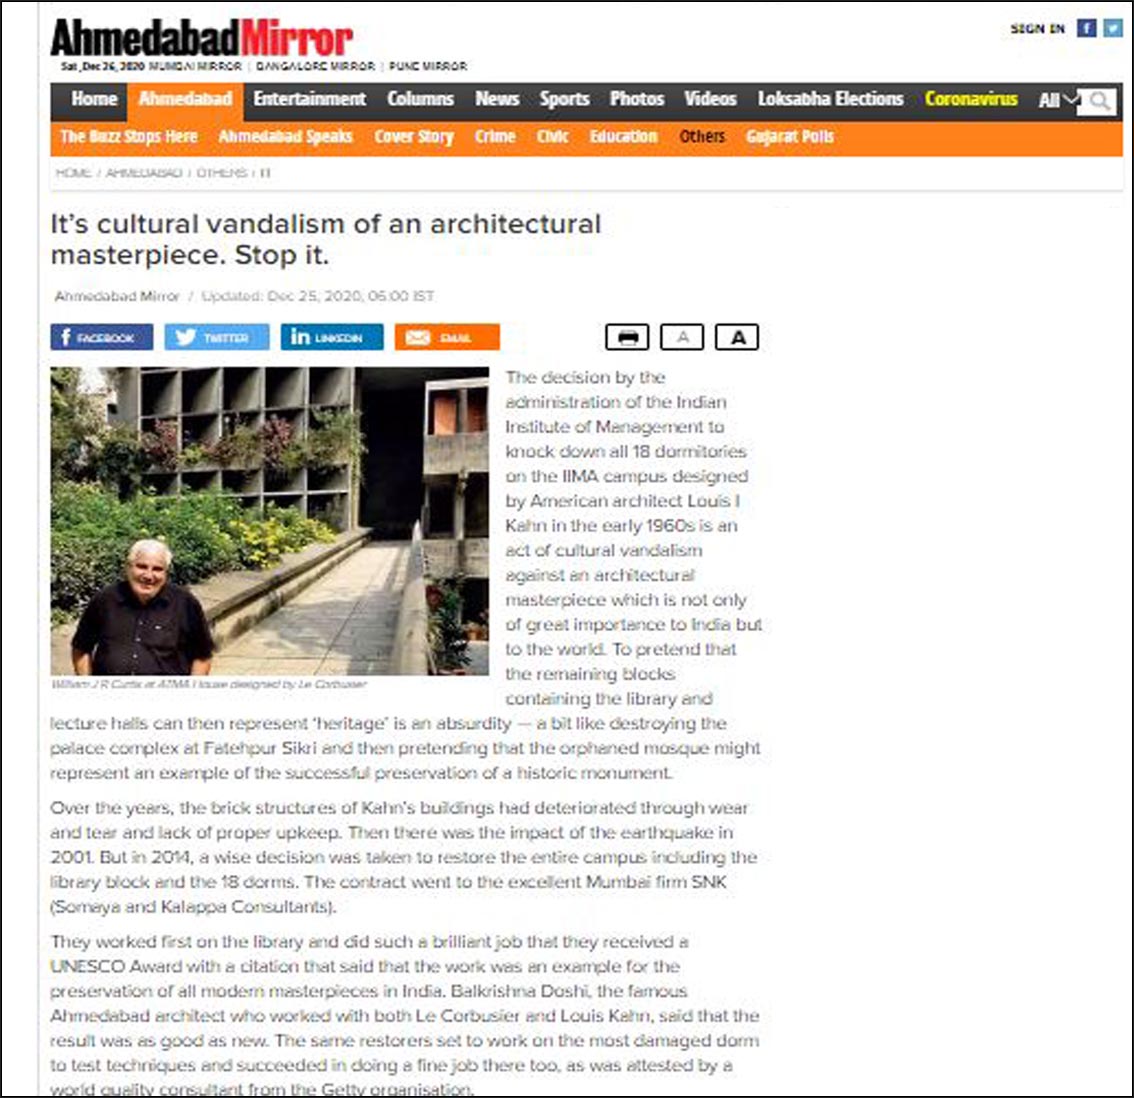 It's cultural vandalism of an architectural masterpiece. Stop, Ahmedabad mirror